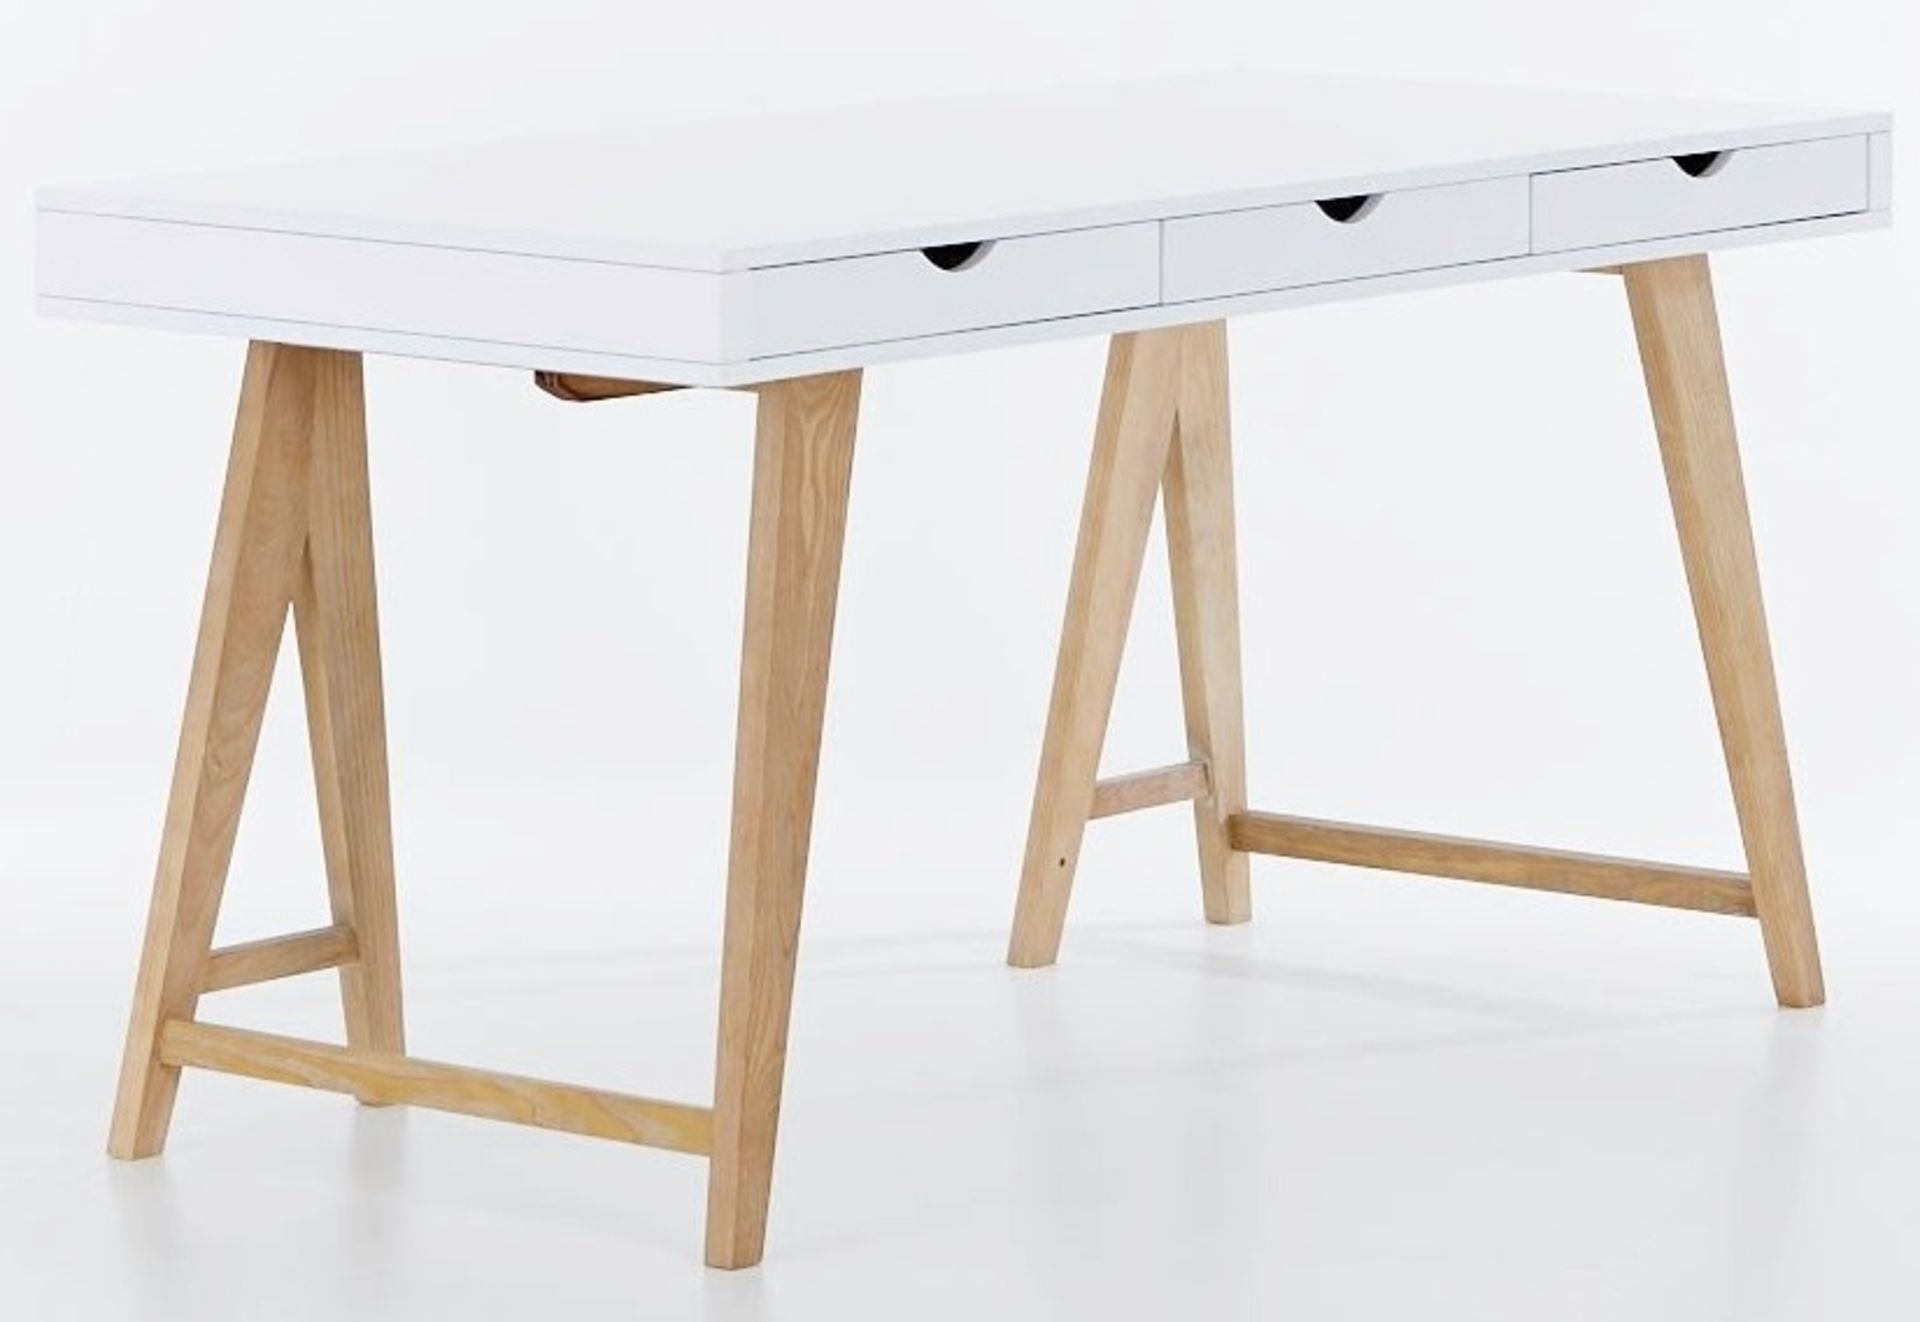 1 x Blue Suntree Ellwood Trestle Desk With a White Finish, Oak Legs and Three Storage Drawers - H76 - Image 2 of 3